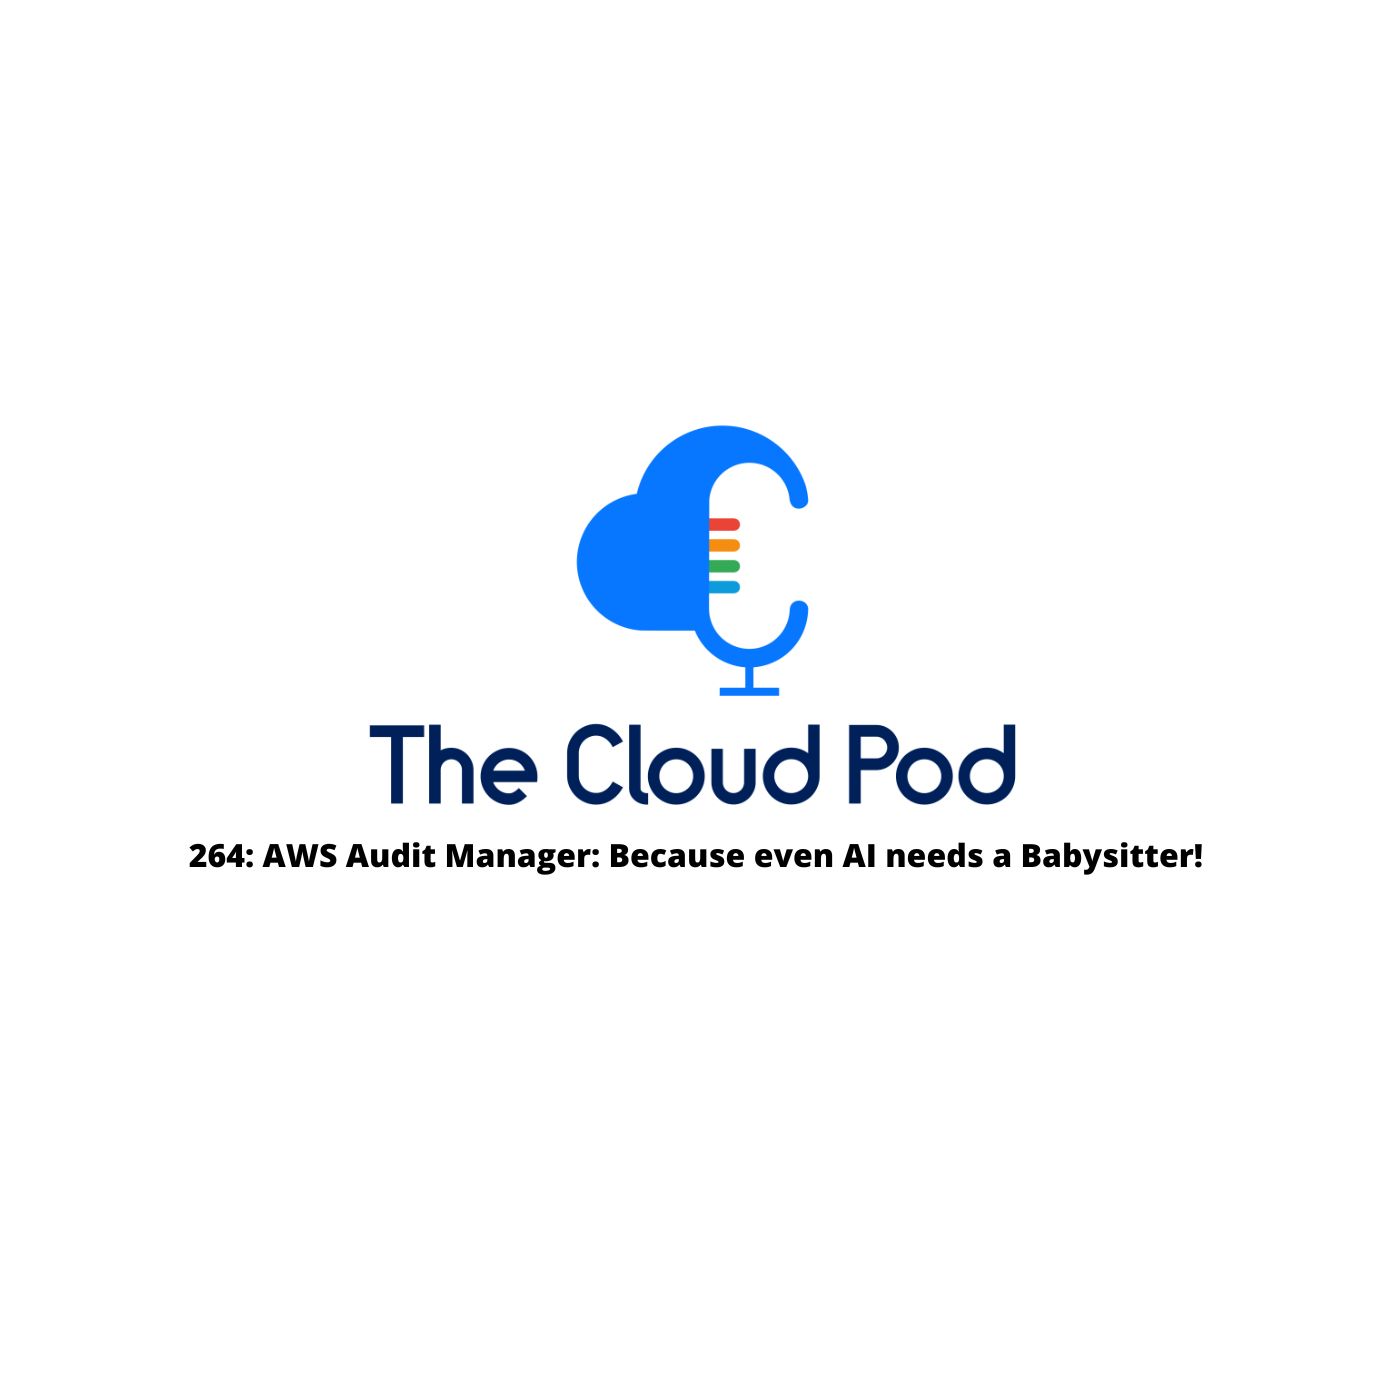 264: AWS Audit Manager: Because even AI needs a Babysitter!